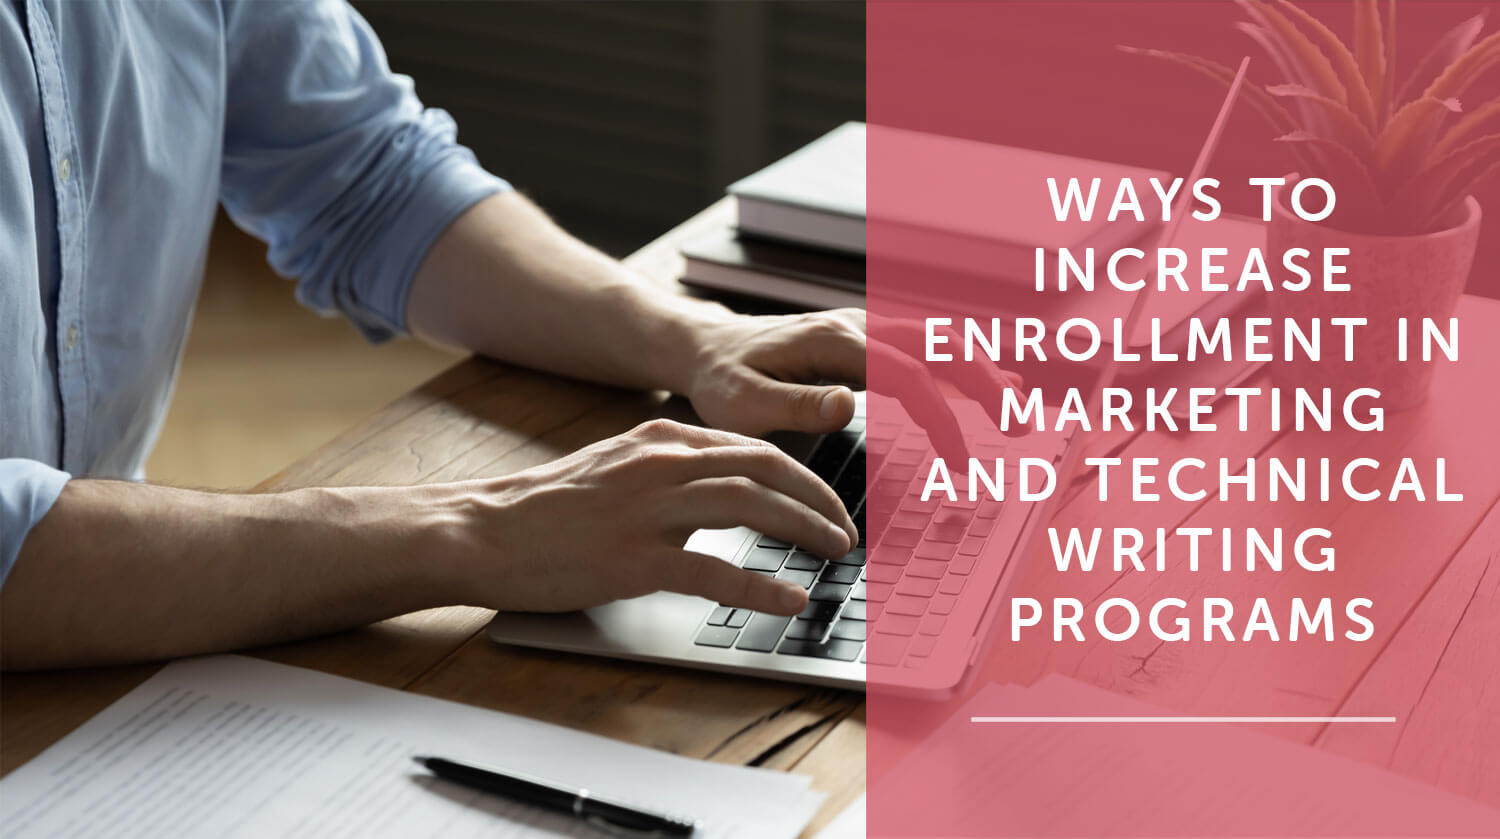 Ways to Increase Enrollment in Marketing and Technical Writing Programs